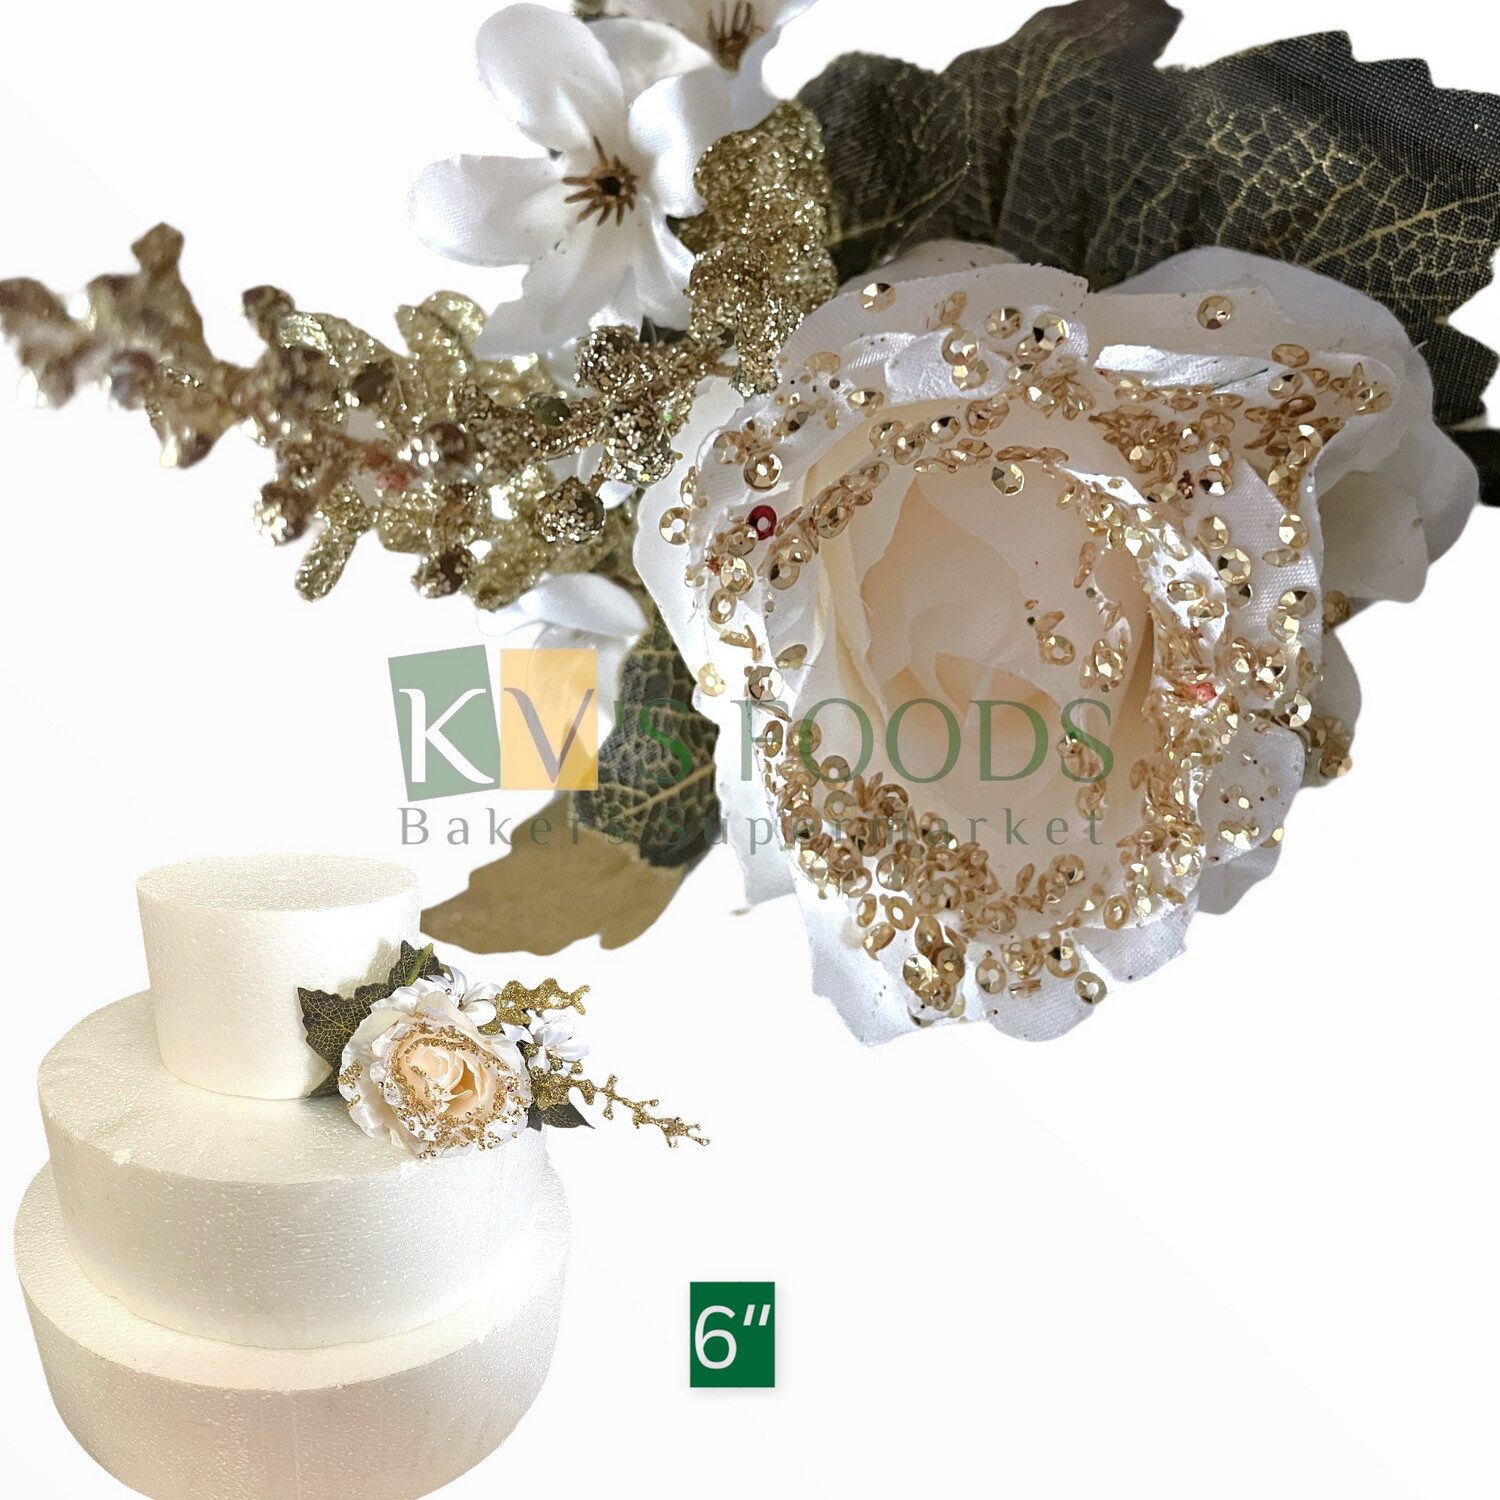 6” Non-edible Artificial Brocade Rose Flower White Color For Cake Decoration - KV’s FOODS